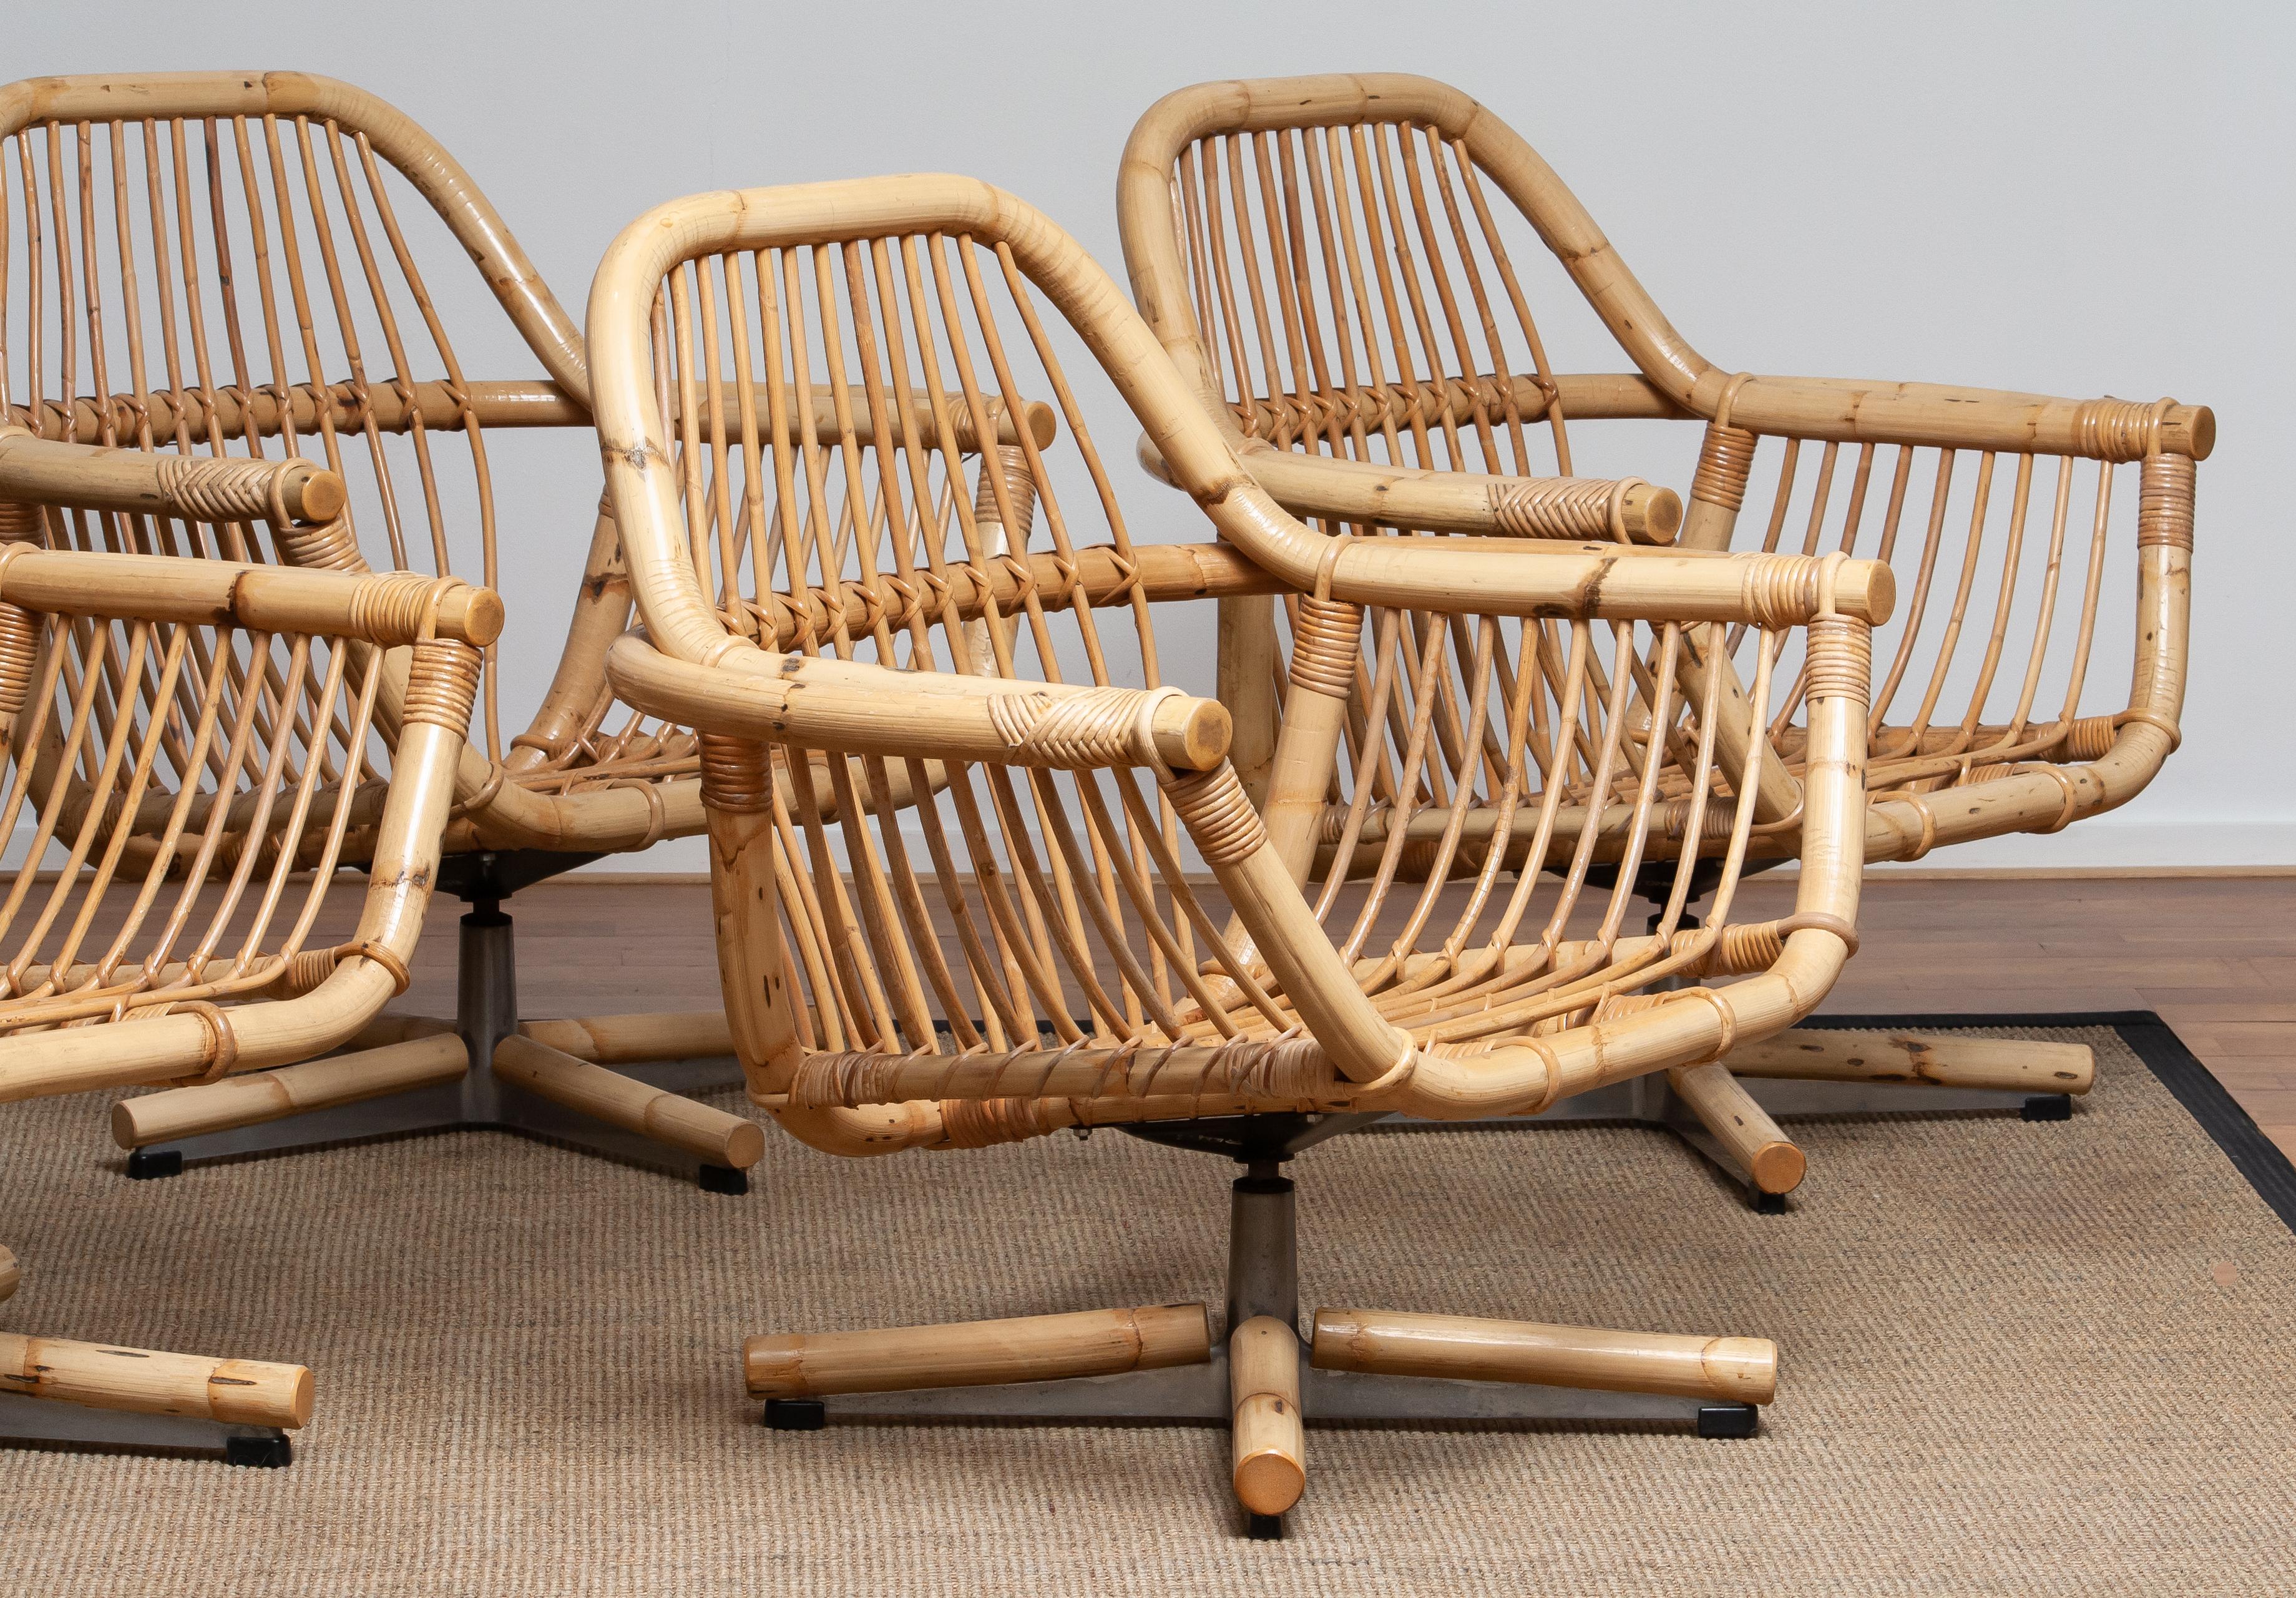 1960s Rattan Garden Set / Lounge Set Consist Five Swivel Chairs and Coffee Table 5